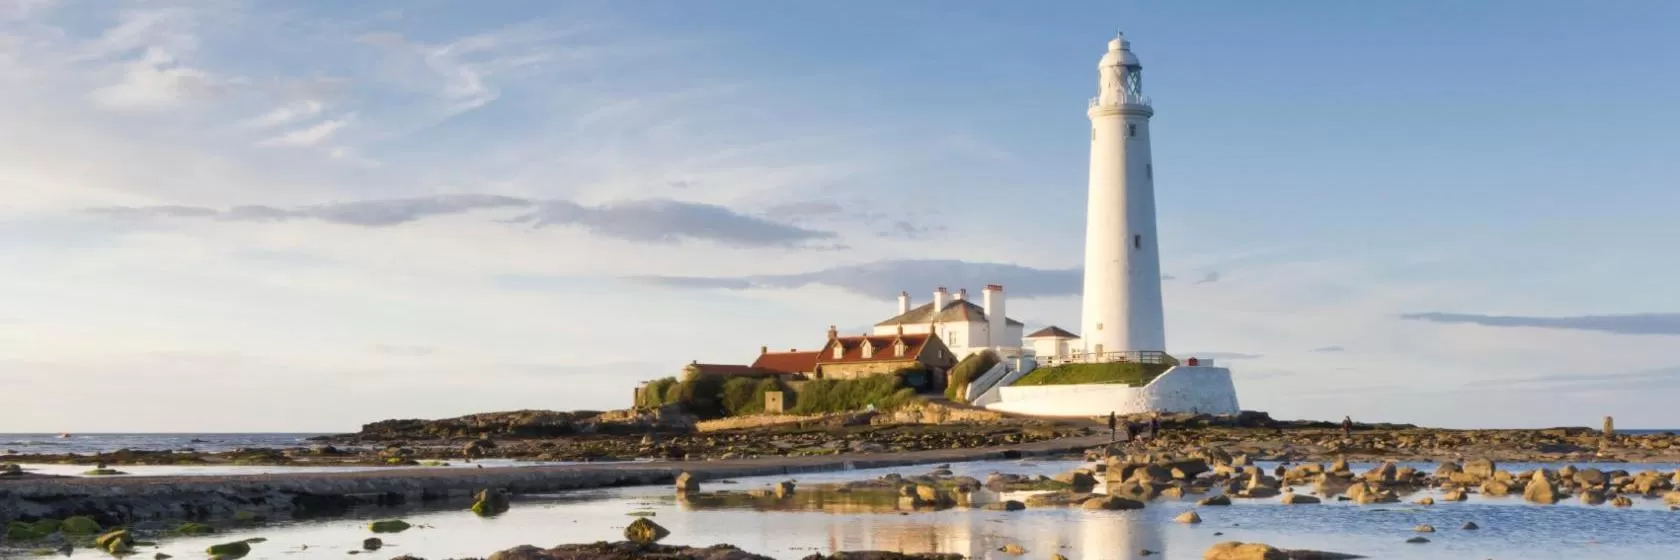 Whitley Bay, Tyne and Wear Hotels